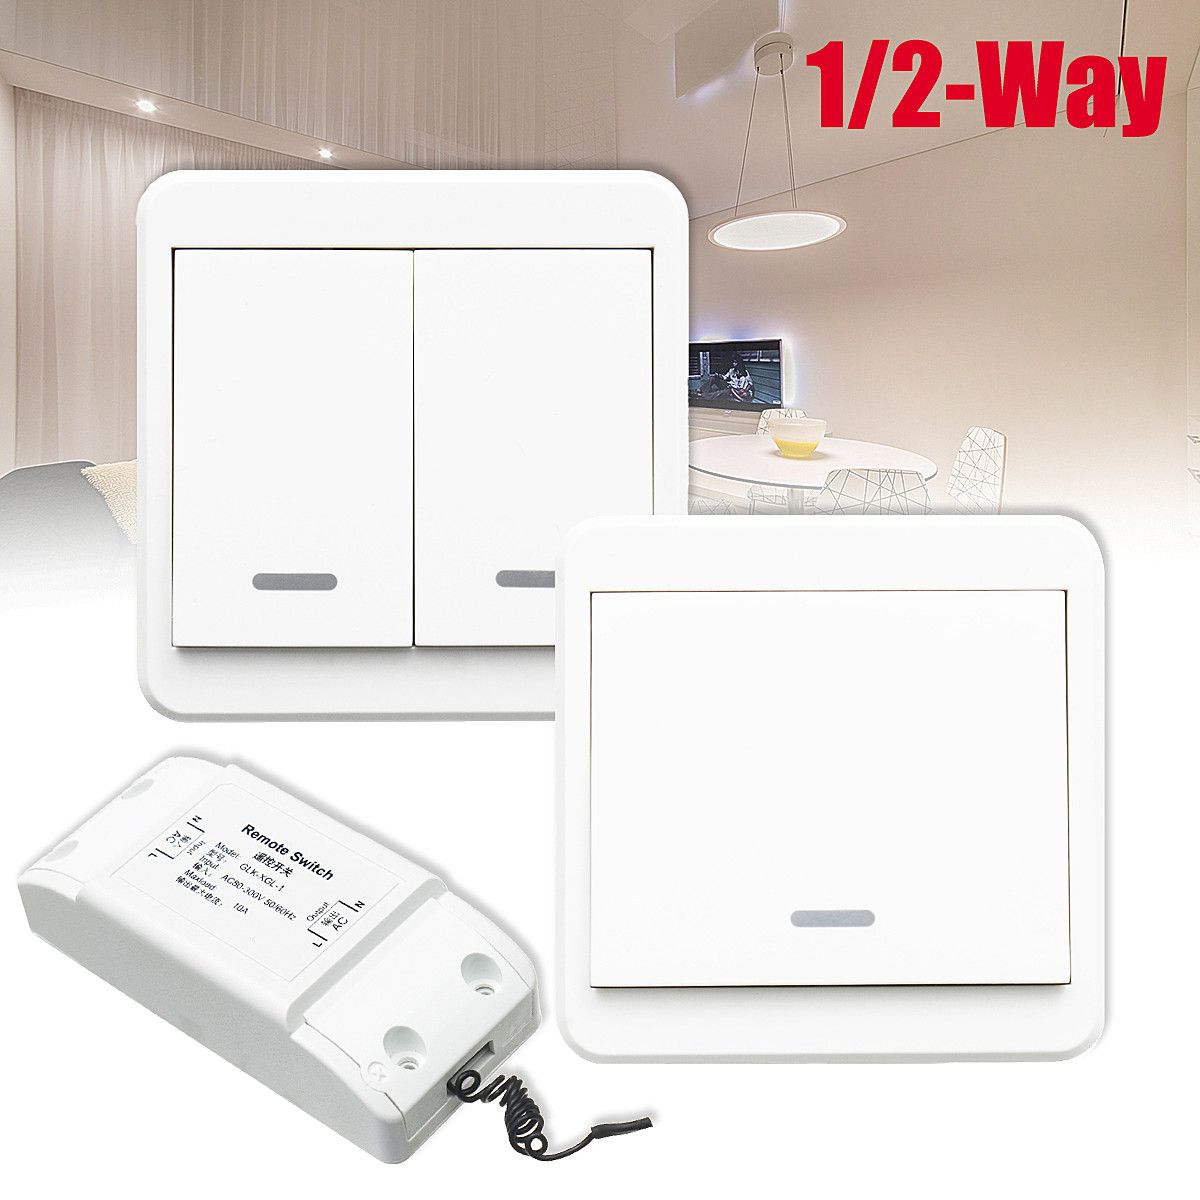 12-Way-Light-Lamp-Wall-Wireless-Remote-Control-Switch-Module-ONOFF--Receiver-1634438